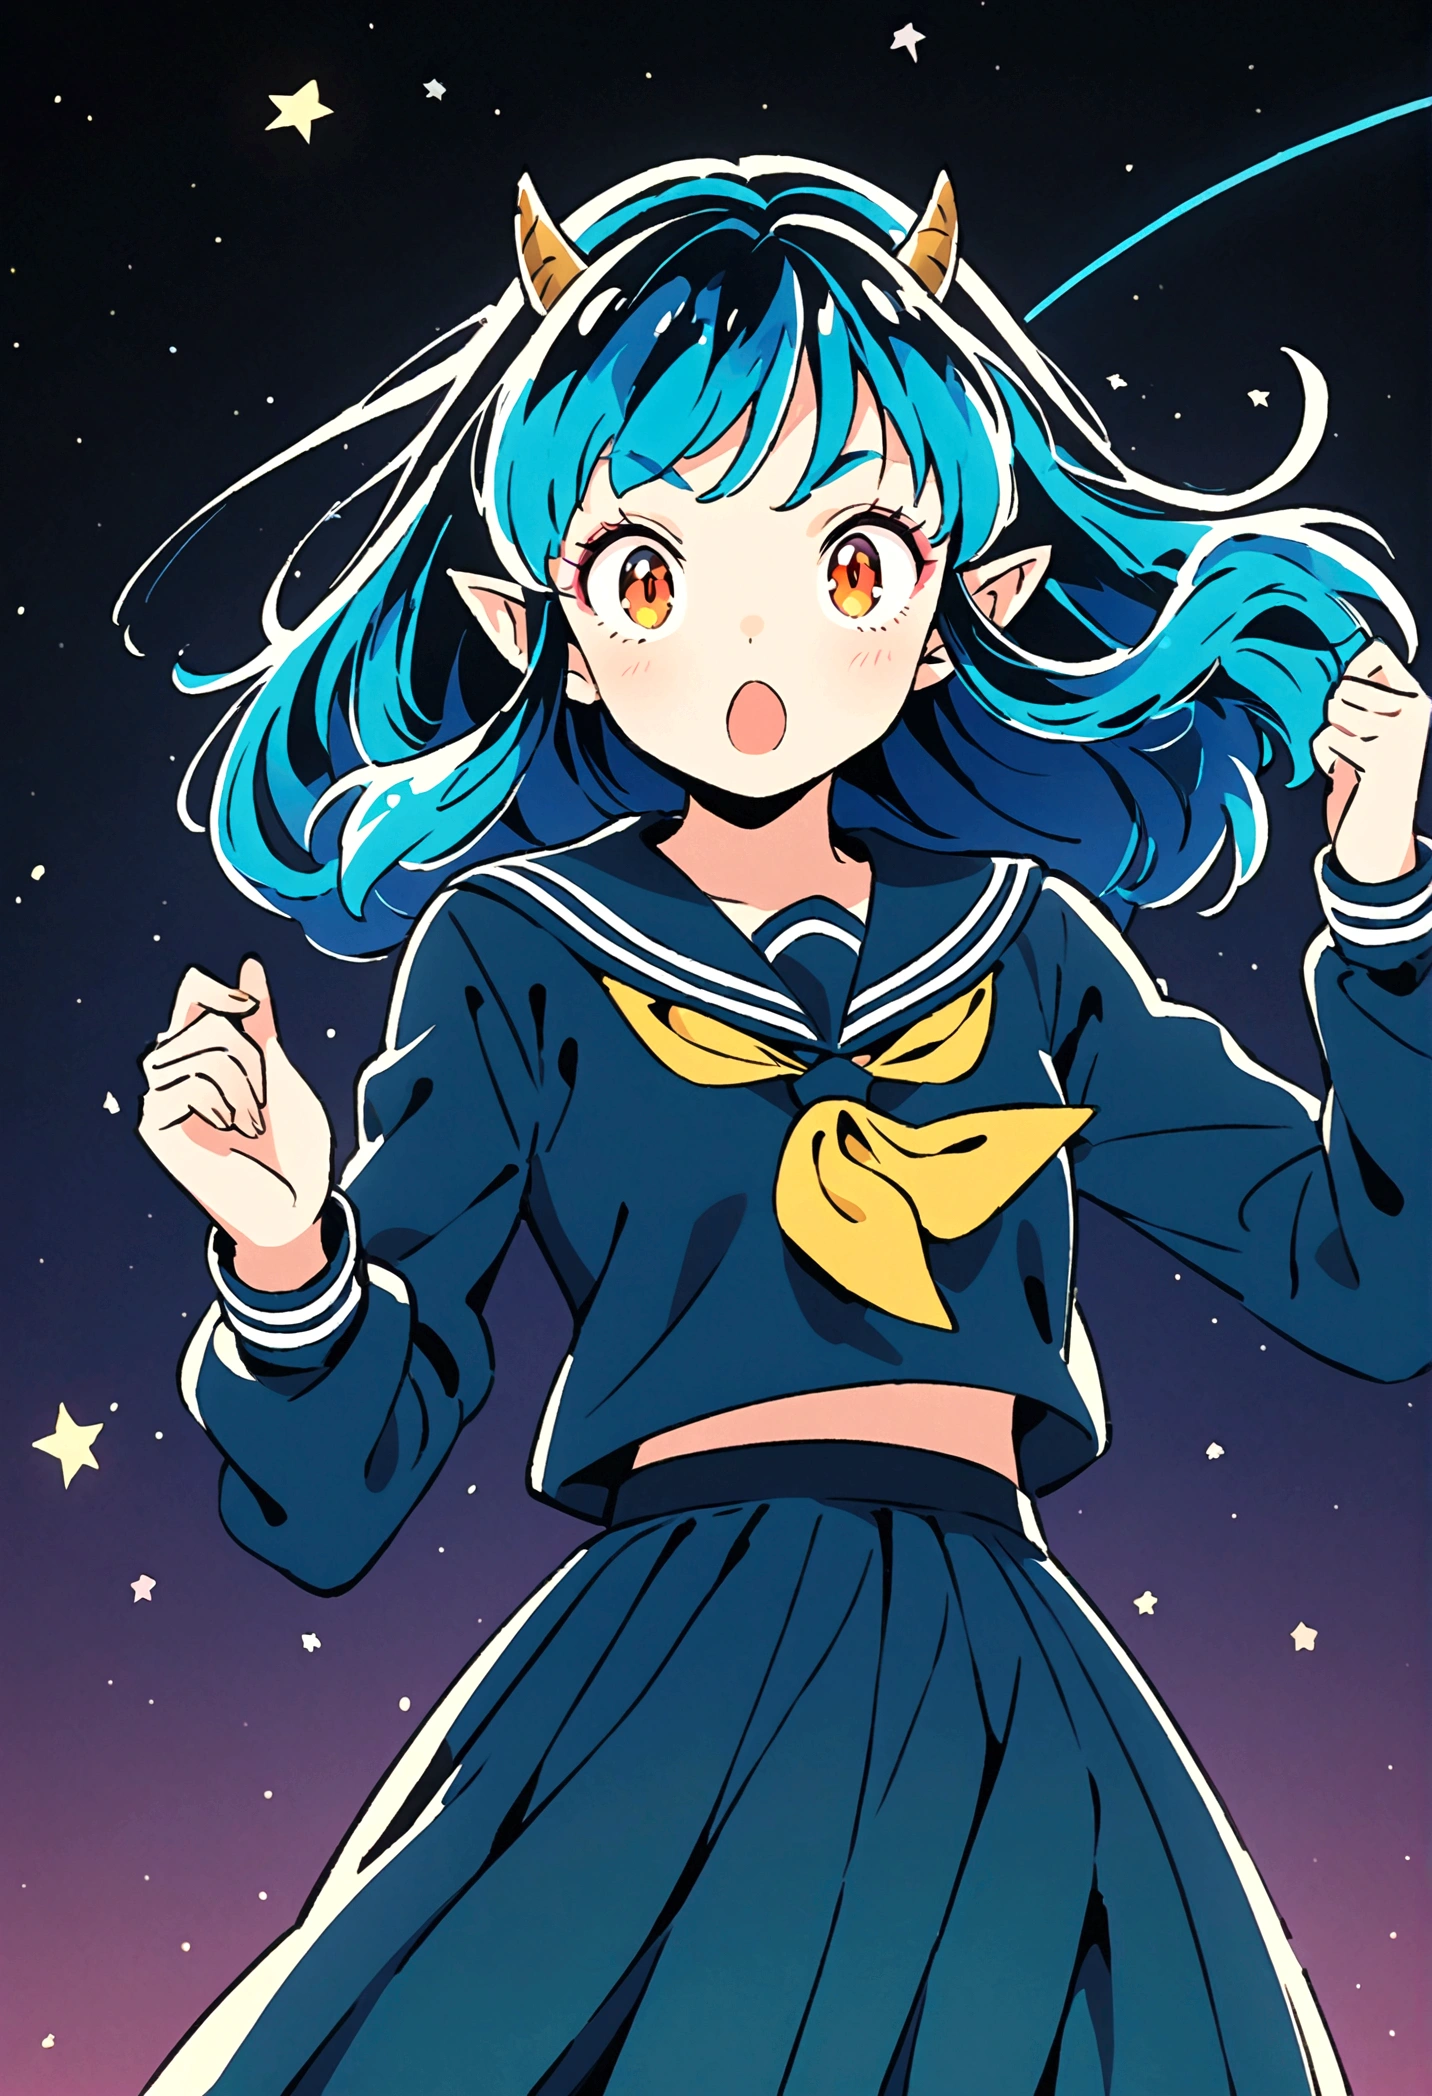 takahashi rumiko style,(1 girl,Lum,long hair,bangs,blue hair,orange eyes,horns,pointy ears,aqua hair,oni horns,(eyeshadow),(shirt,long sleeves,sailor suit,sailor collar,neckerchief,yellow neckerchief,blue shirt,blue sailor collar,blue skirt),the character Lum from "Urusei Yatsura",Do cute girly poses,bright smile,fine,Lum is floating in the air,lightning effect,Bright and cheerful atmosphere,BREAK,(Creates a POP illustration style background,Background elements such as space or a starry sky,Outer space with the moon and stars floating in it,rich colors,colorful,shooting star,draw with thick lines,Sparkling,unbelievably absurd,zentangle elements,vector art),beautiful light and shadow,BREAK,(masterpiece:1.3),(highest quality:1.4),(ultra detailed:1.5),High resolution,extremely detailed,unity 8k wallpaper